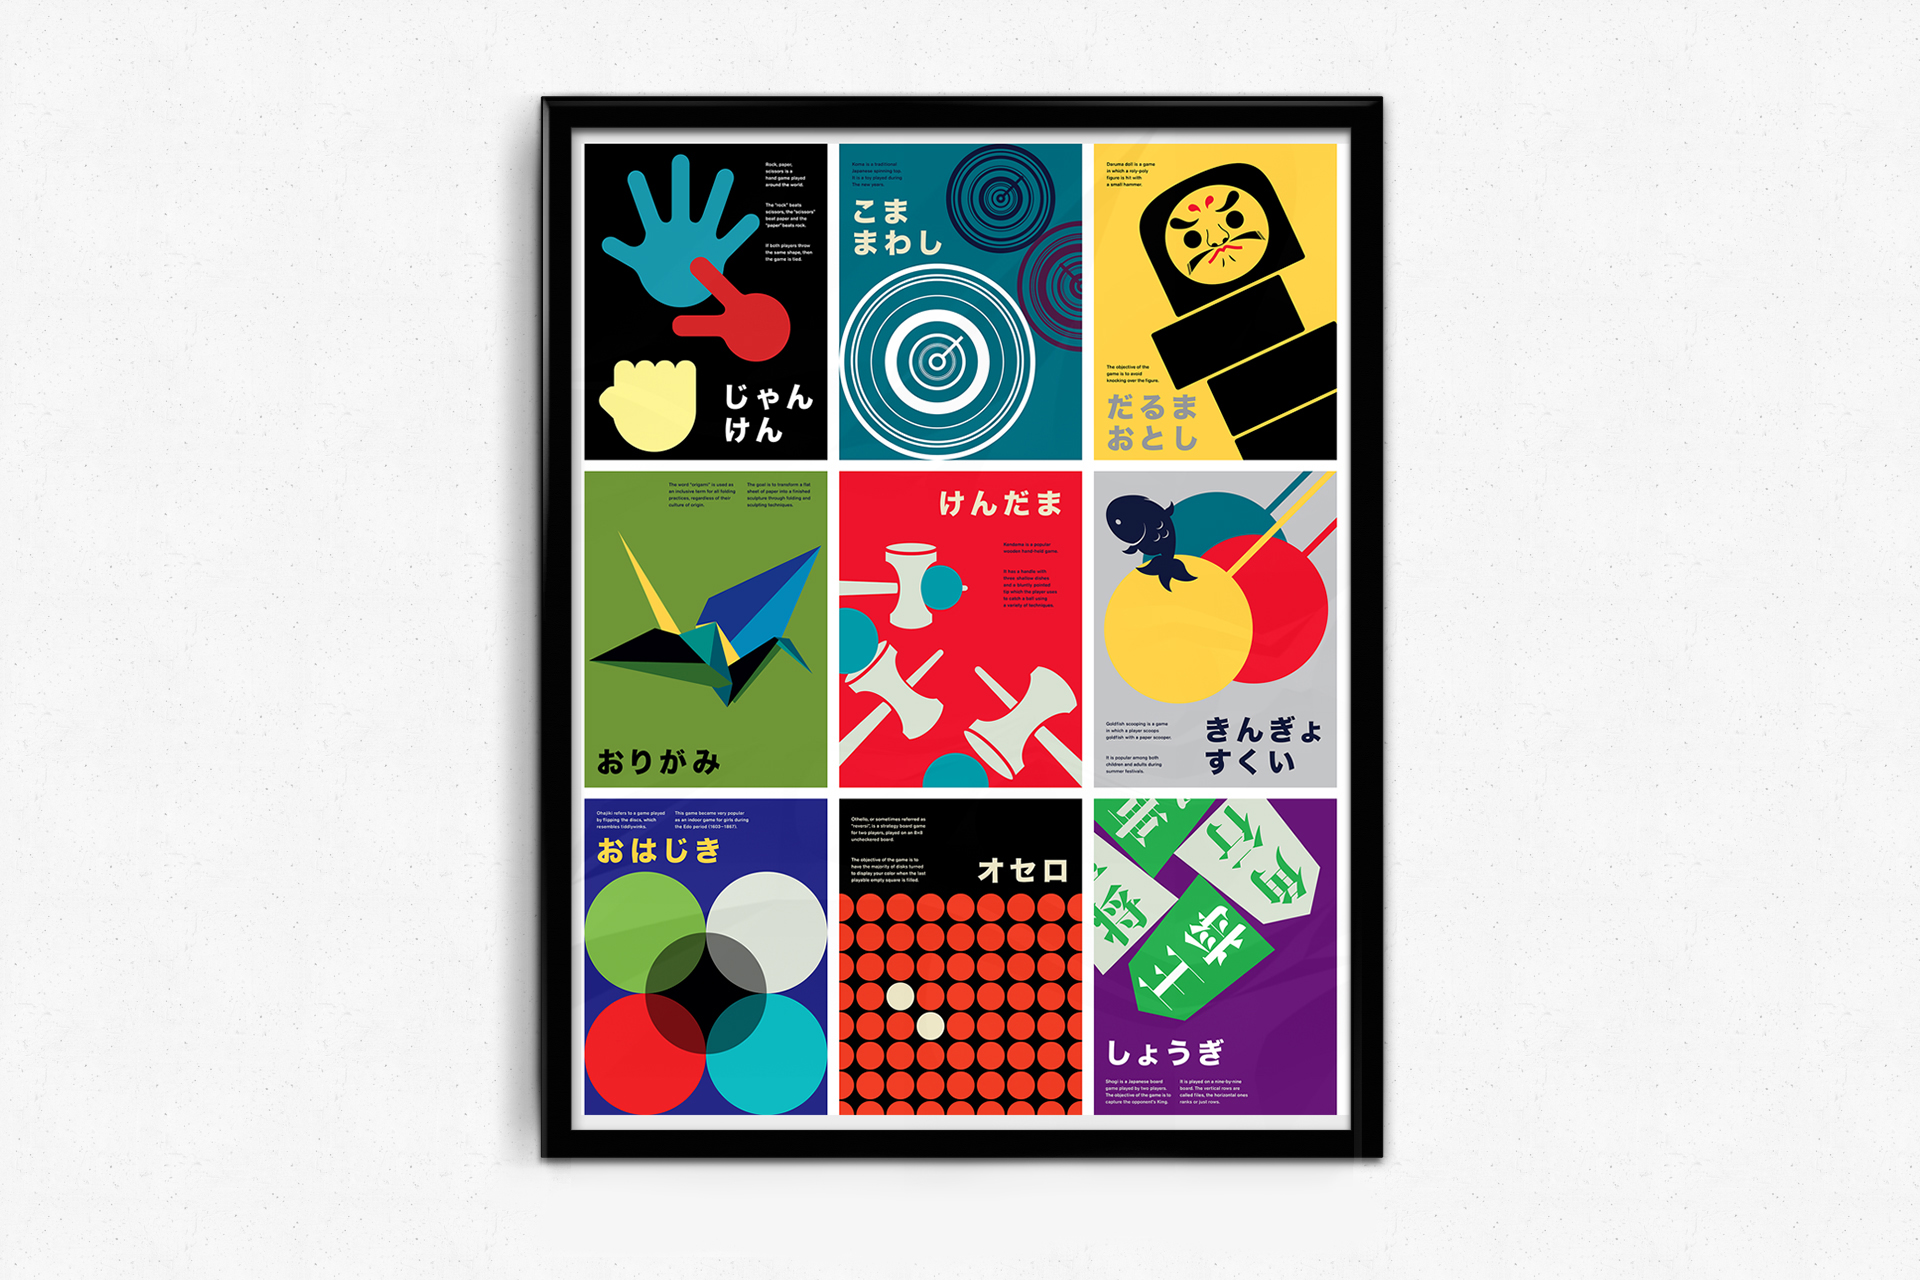 A picture in a frame that show nine different small and colorful infographic posters.